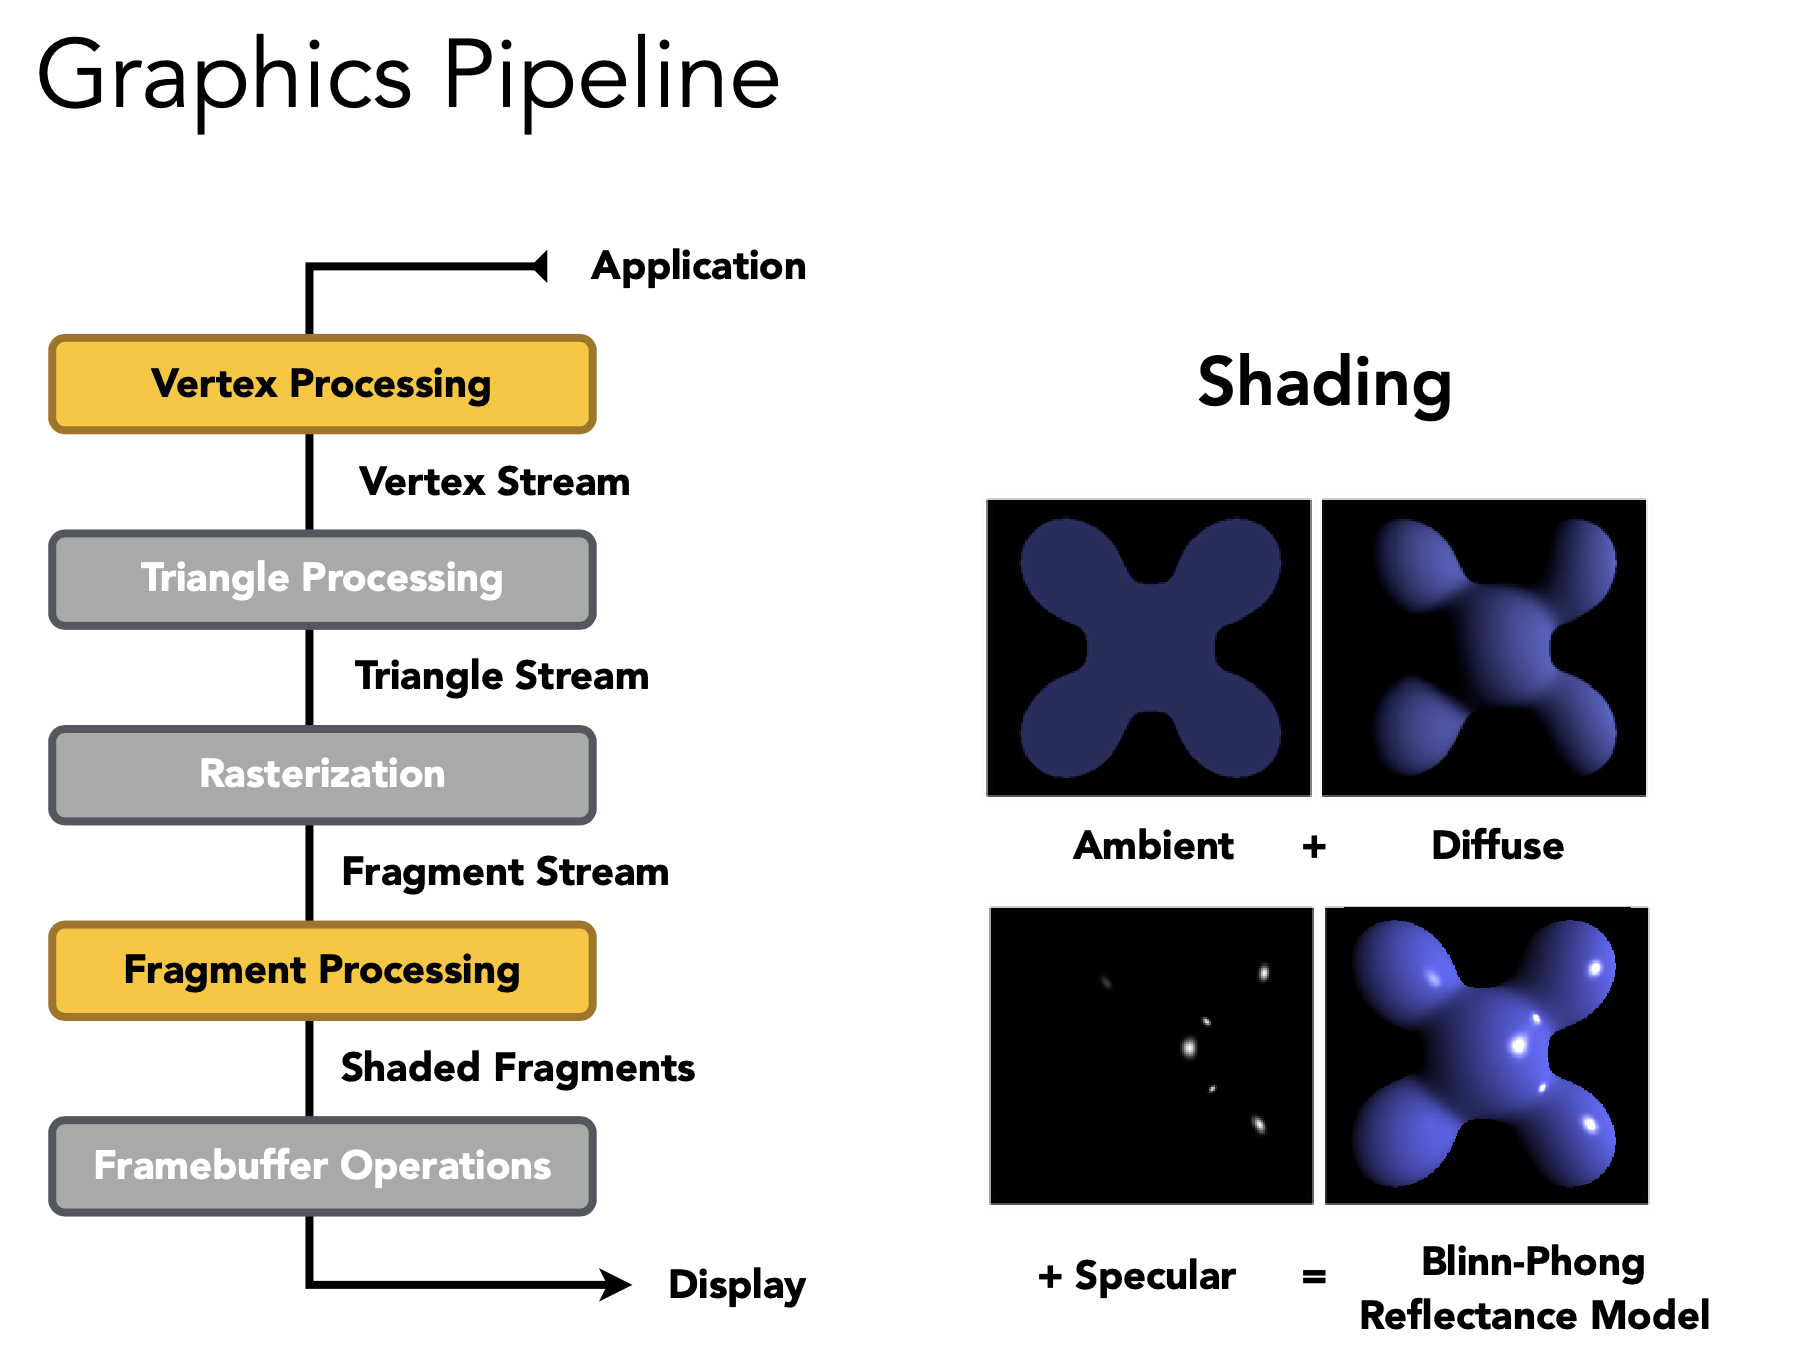 Graphics Pipeline - Fragment Processing - Shading